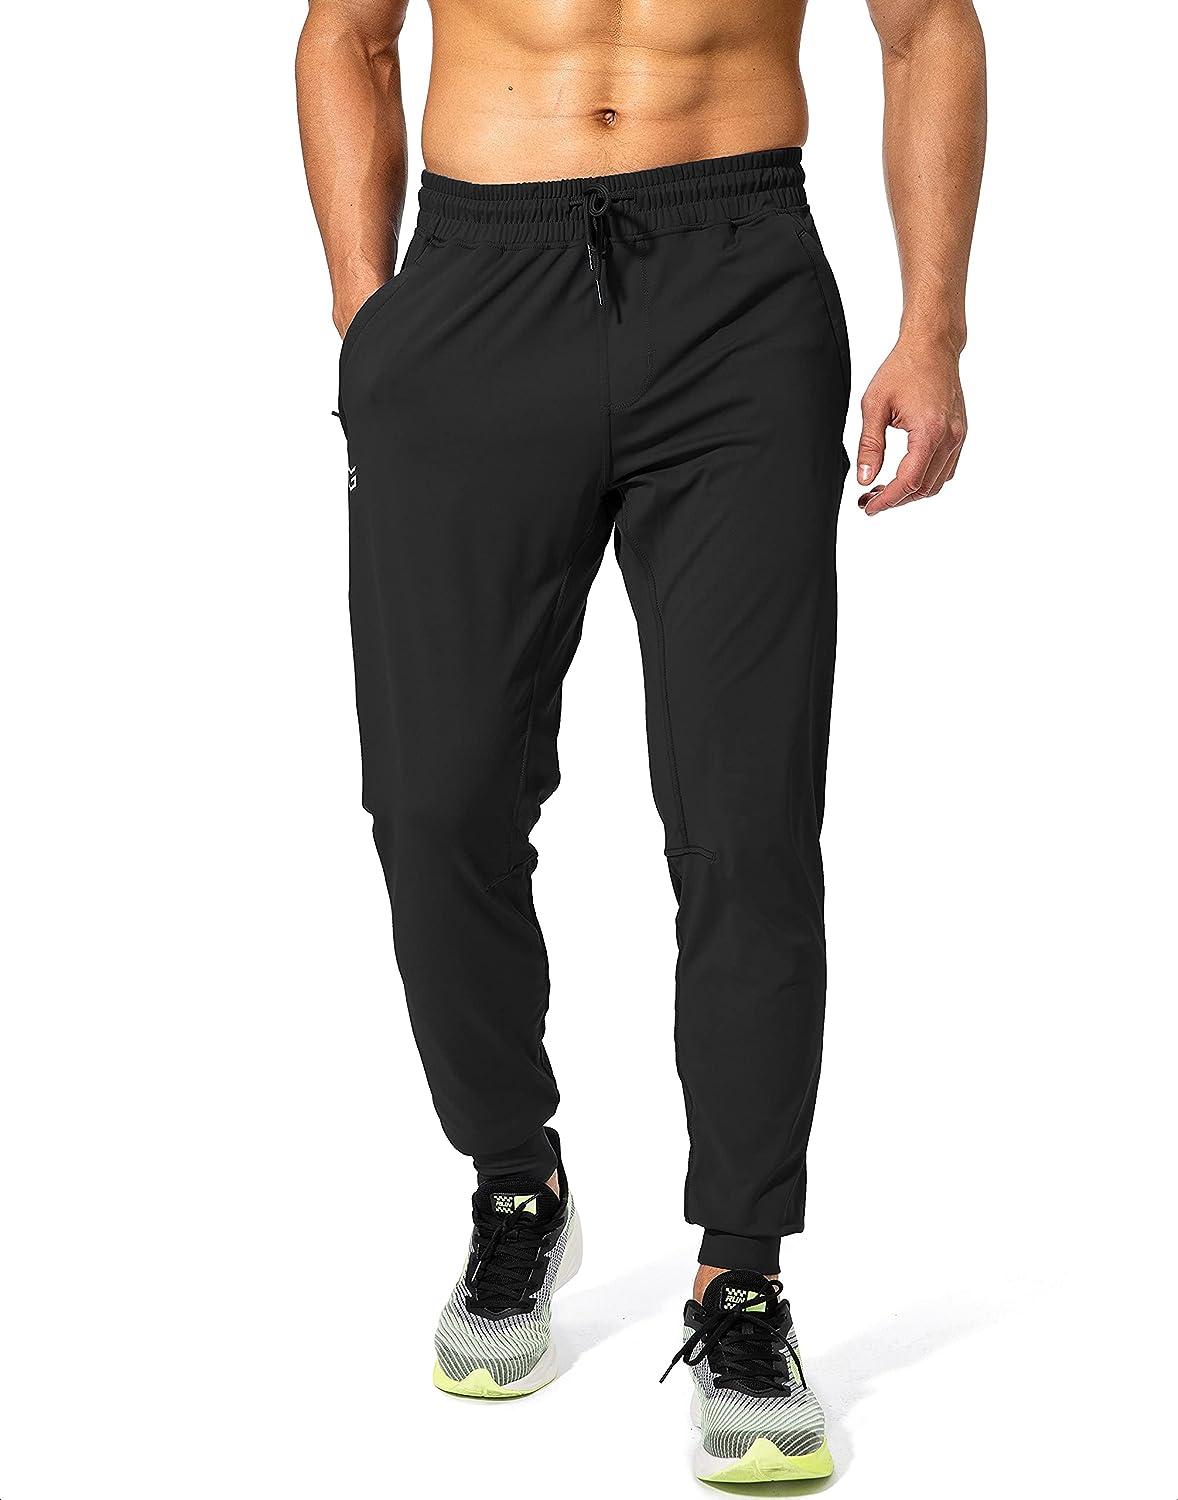 G Gradual Men's Sweatpants with Zipper Pockets Athletic Pants Traning Track  Pants Joggers for Men Soccer, Running, Workout Black Large